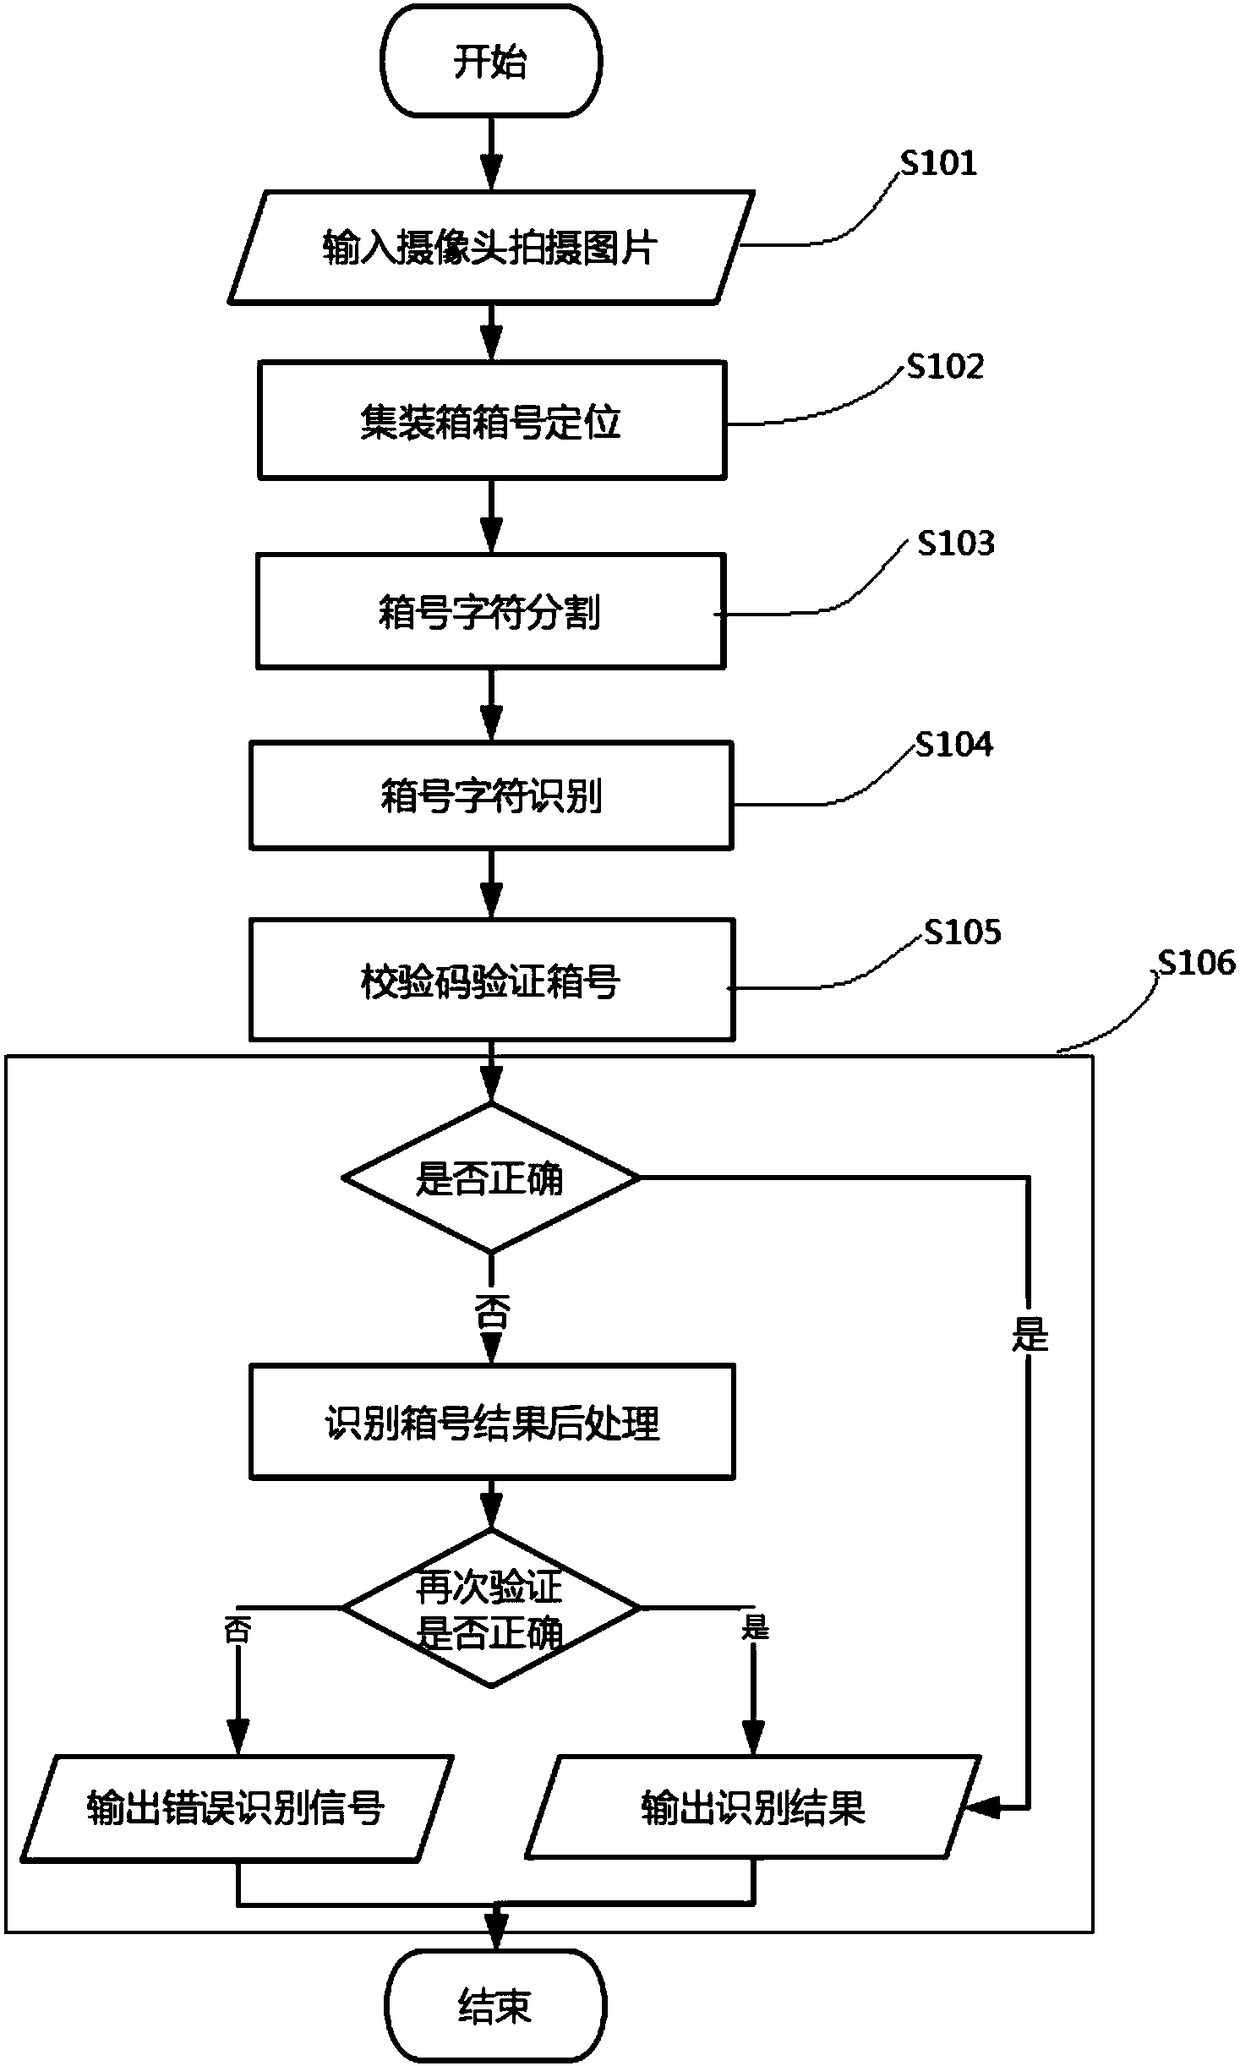 Convolutional neural network classification-based container number recognition method